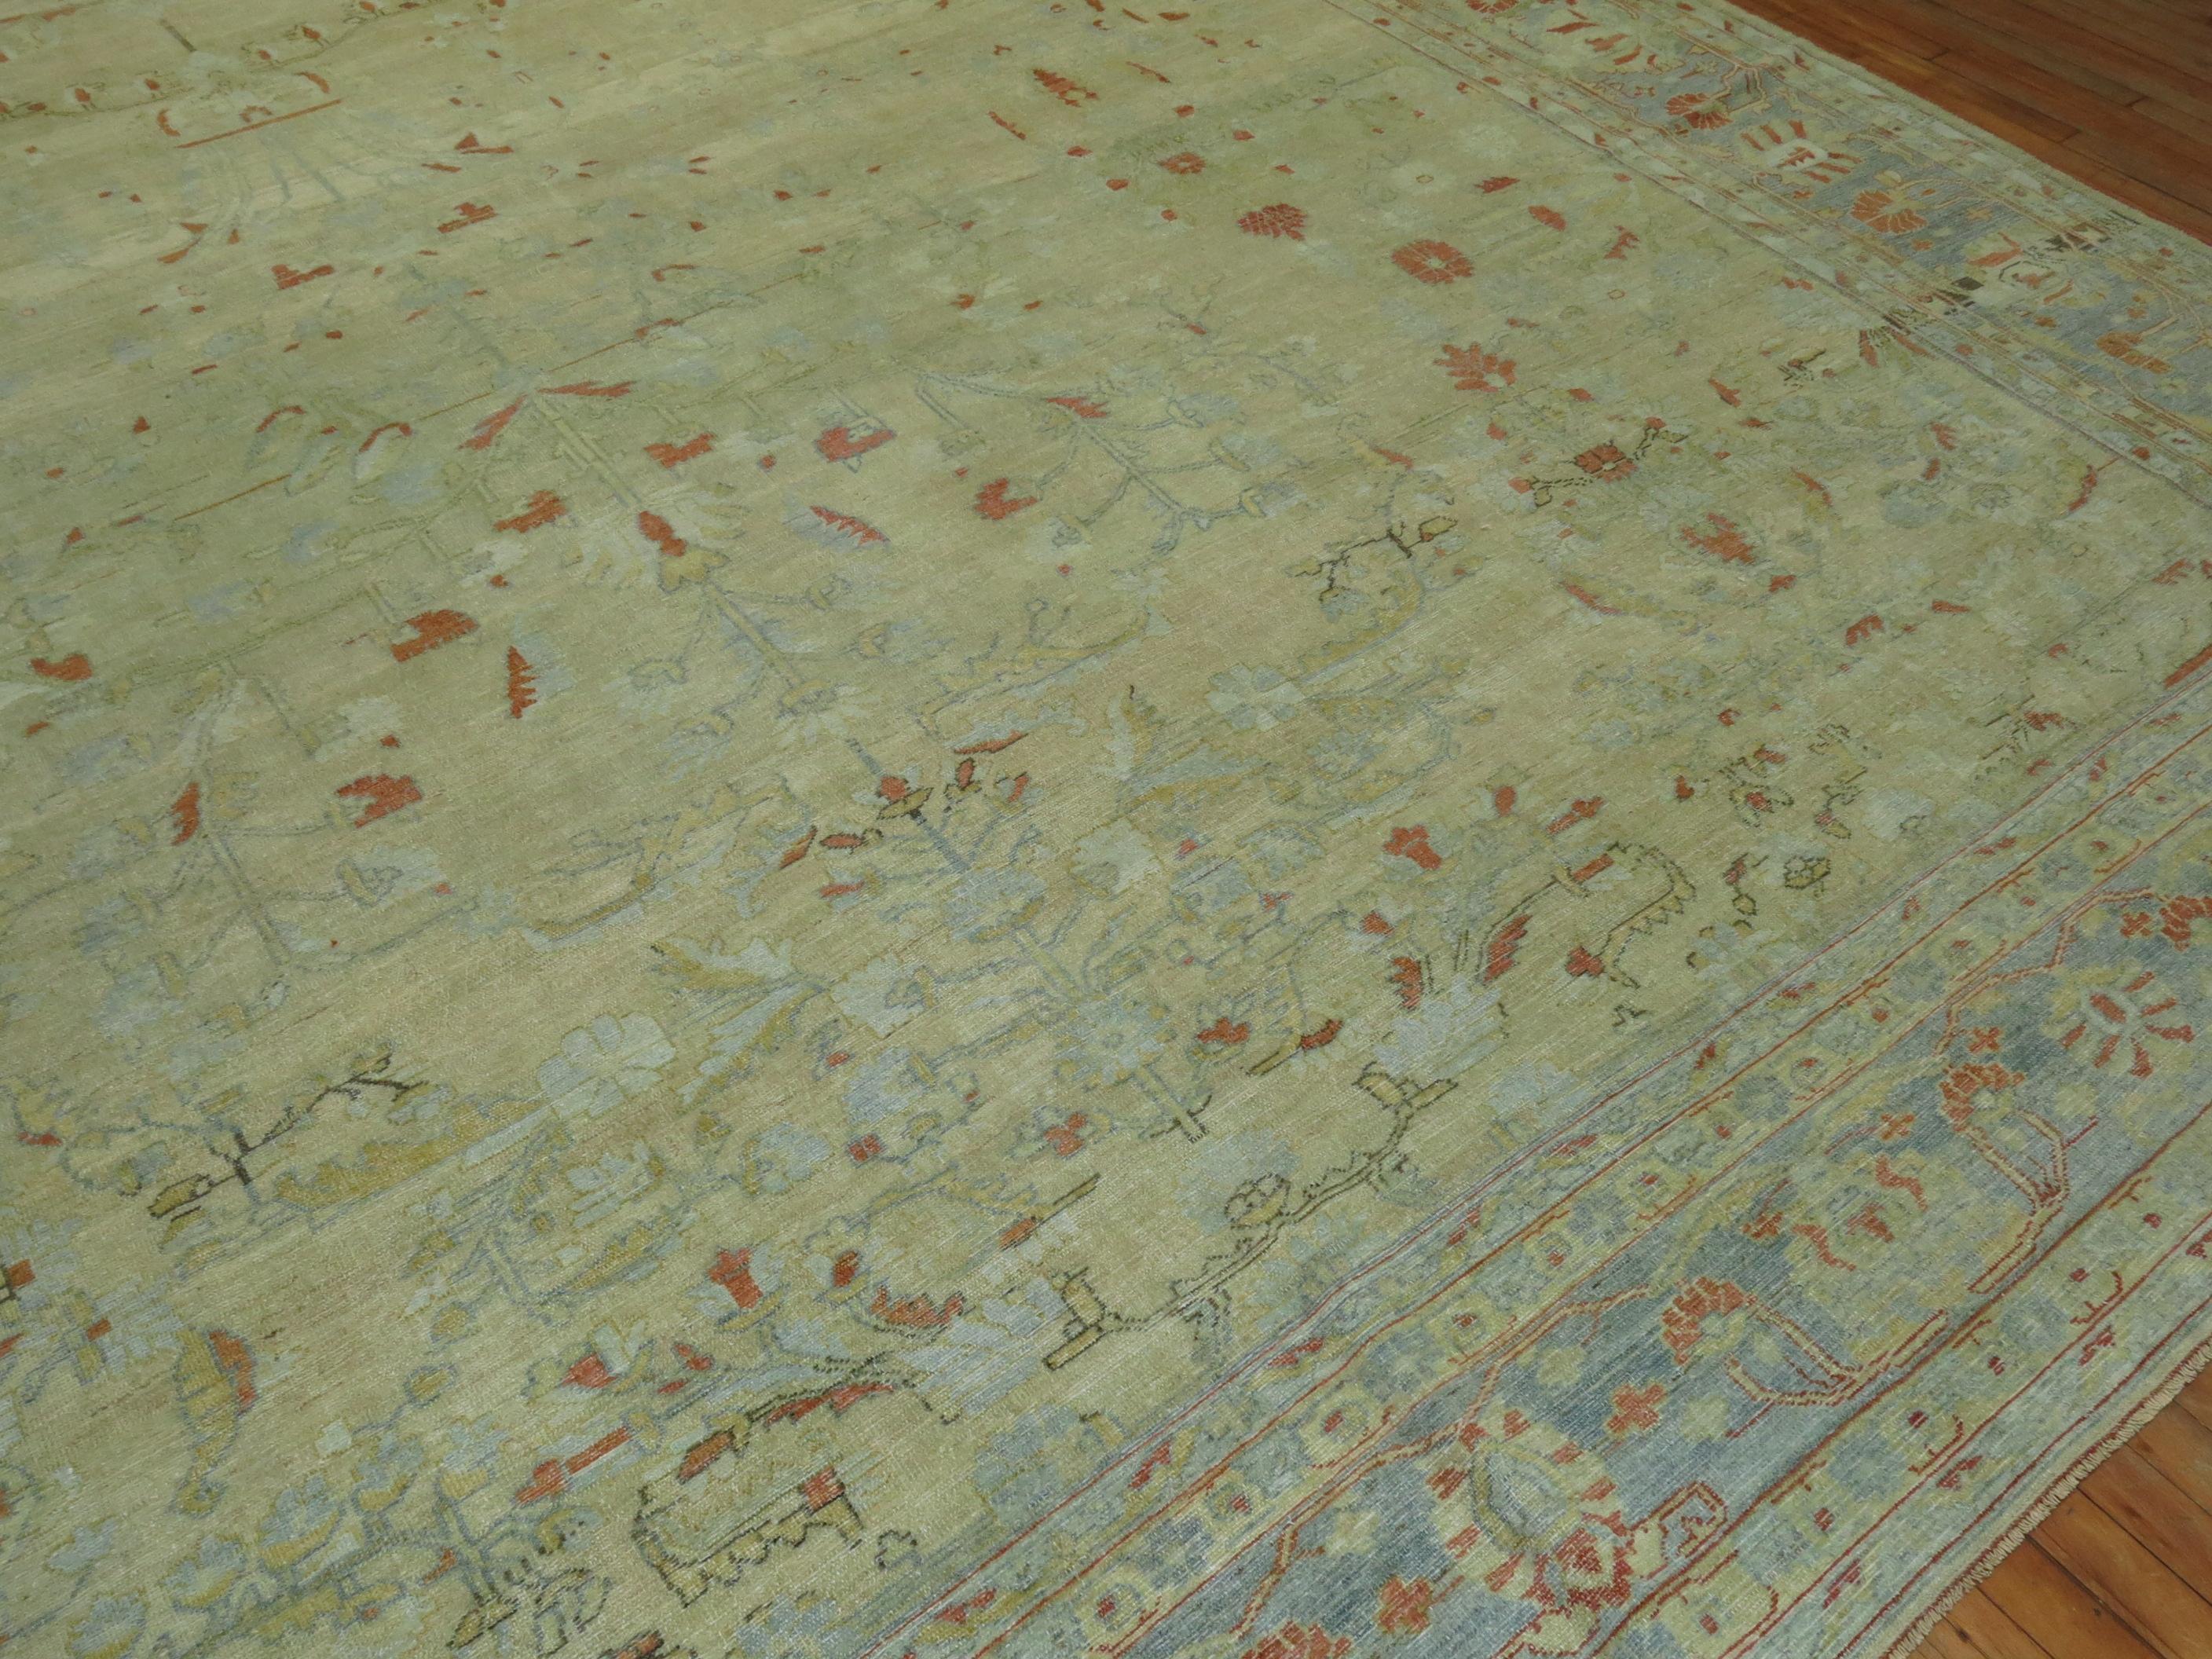 Stunning oversize antique Persian Mohajeran Sarouk rug consisting of a pale wheat ground and powder blue border, some terracotta accents too, circa 1910. 

Measures: 13' x 19'8